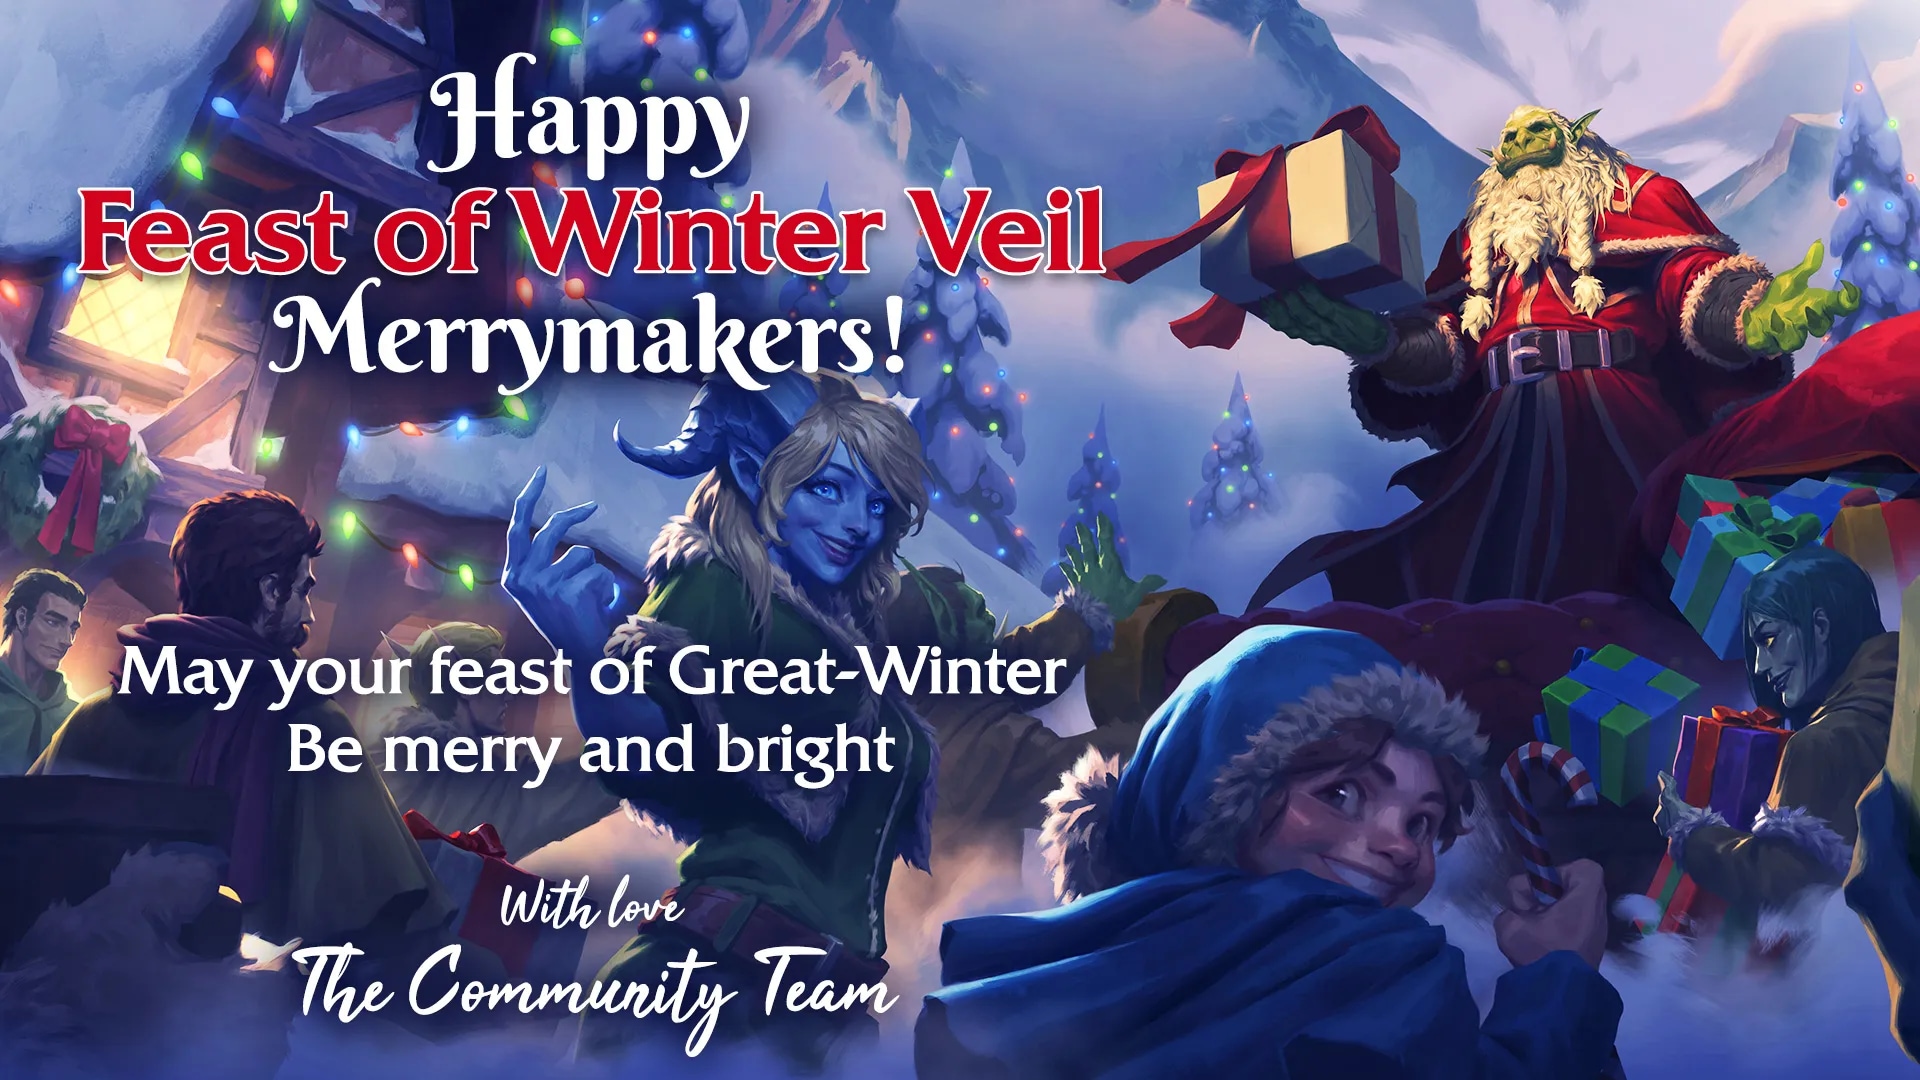 Festive winter scene with Greatfather Winter giving gifts that says, Happy Feast of Winter Veil Merrymakers! May your feast of Great-Winter be merry and bright. With Love from the Community Team